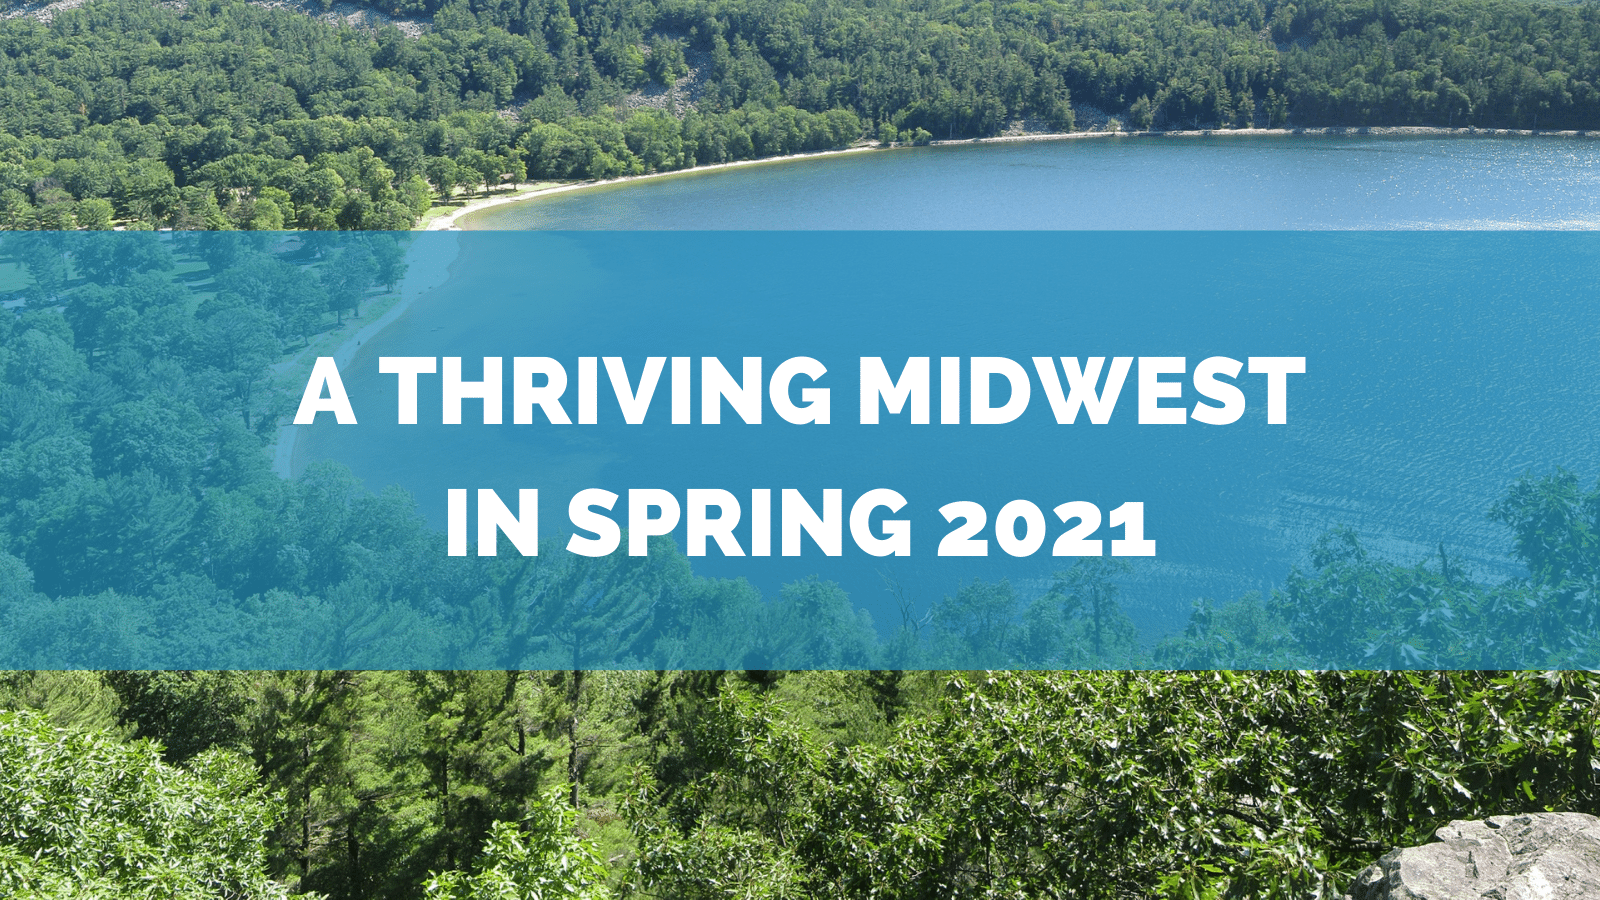 A Thriving Midwest in Spring 2021